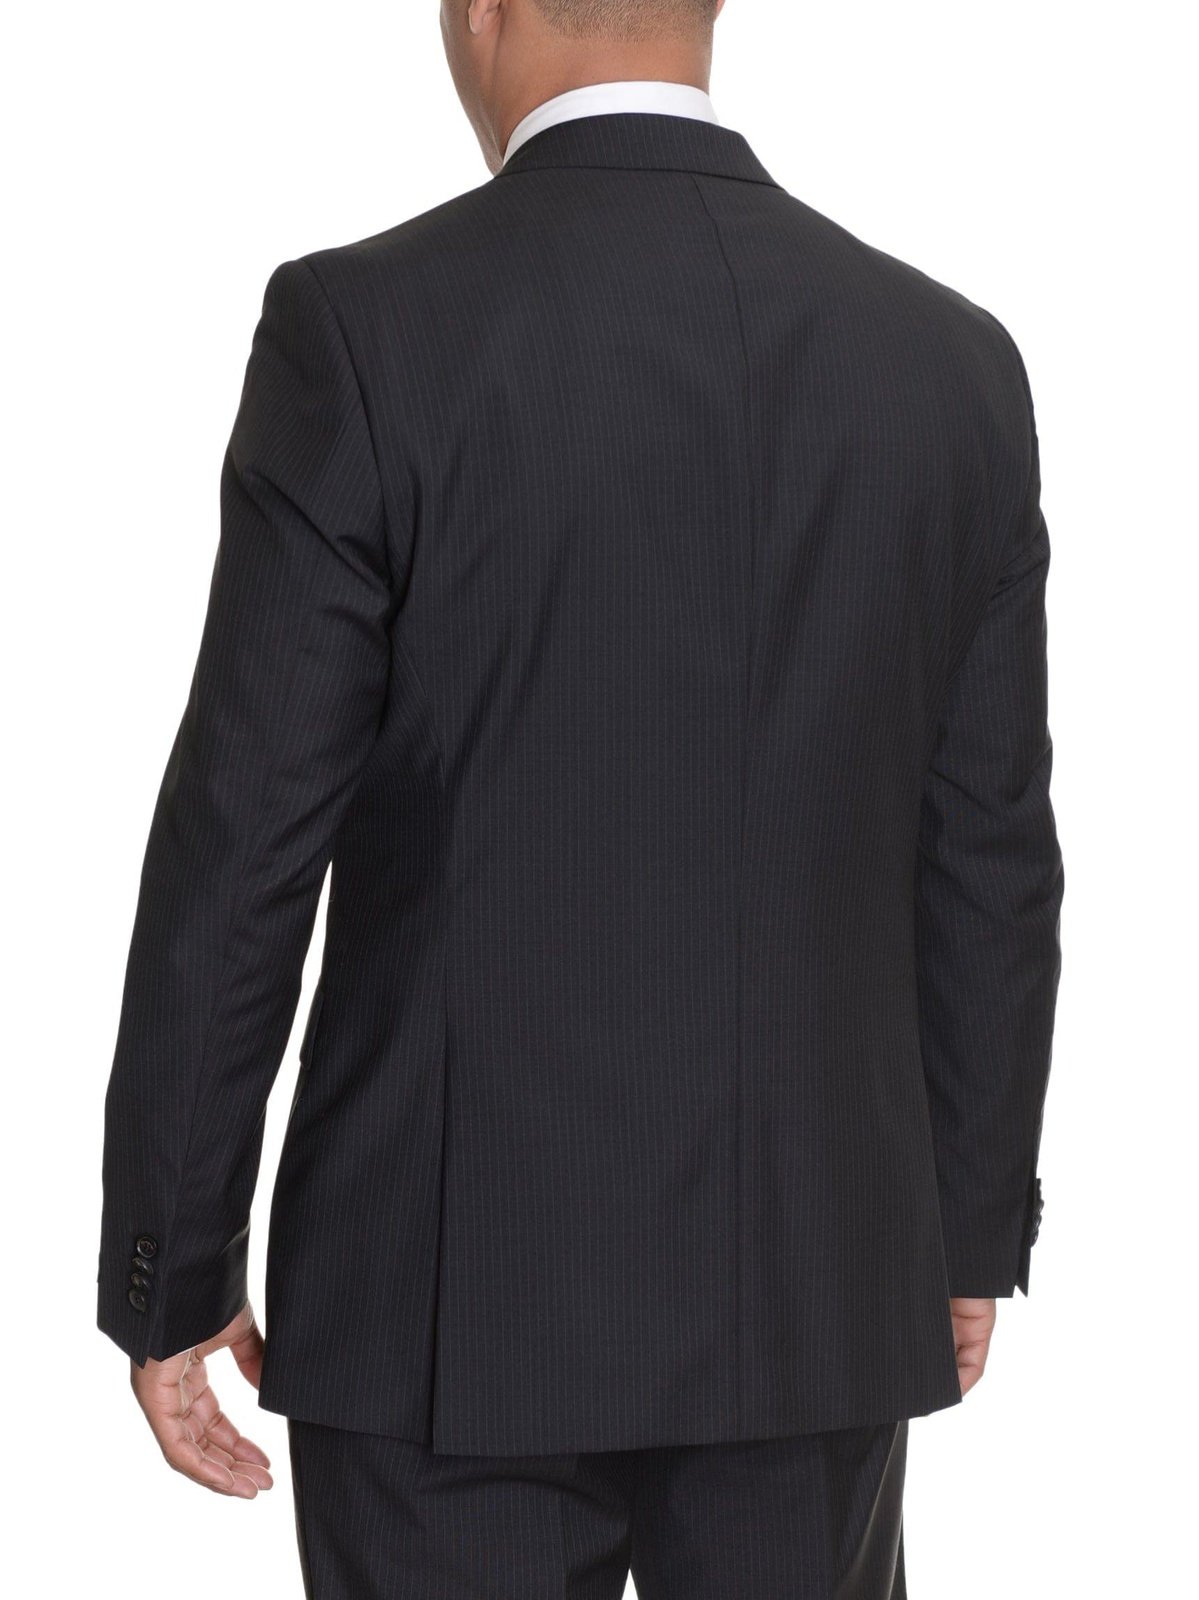 HUGO BOSS TWO PIECE SUITS HUGO BOSS The Grand/Central Black Striped Two Button Wool Suit